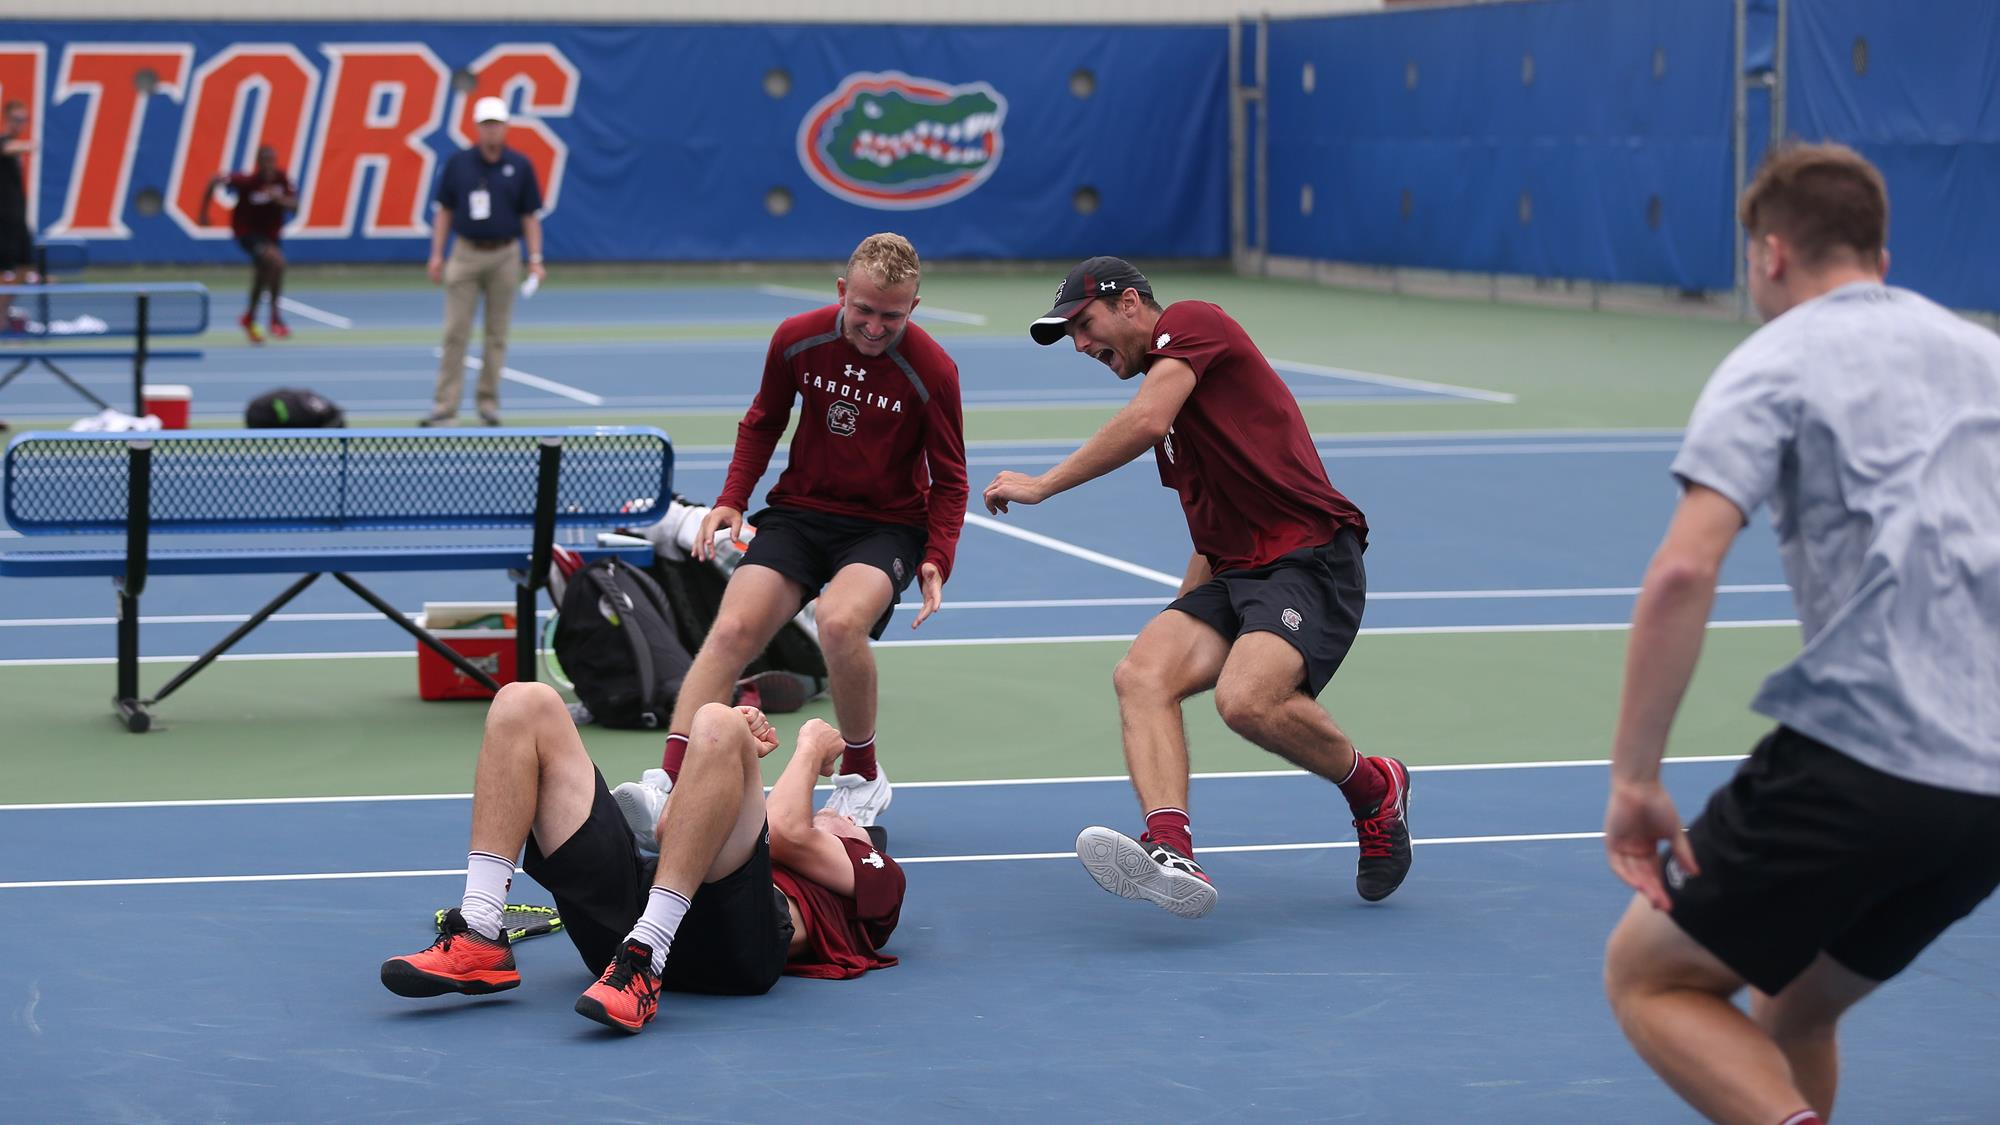 Gamecocks Upset 11th-ranked Texas A&M, Advance to Semifinal Match